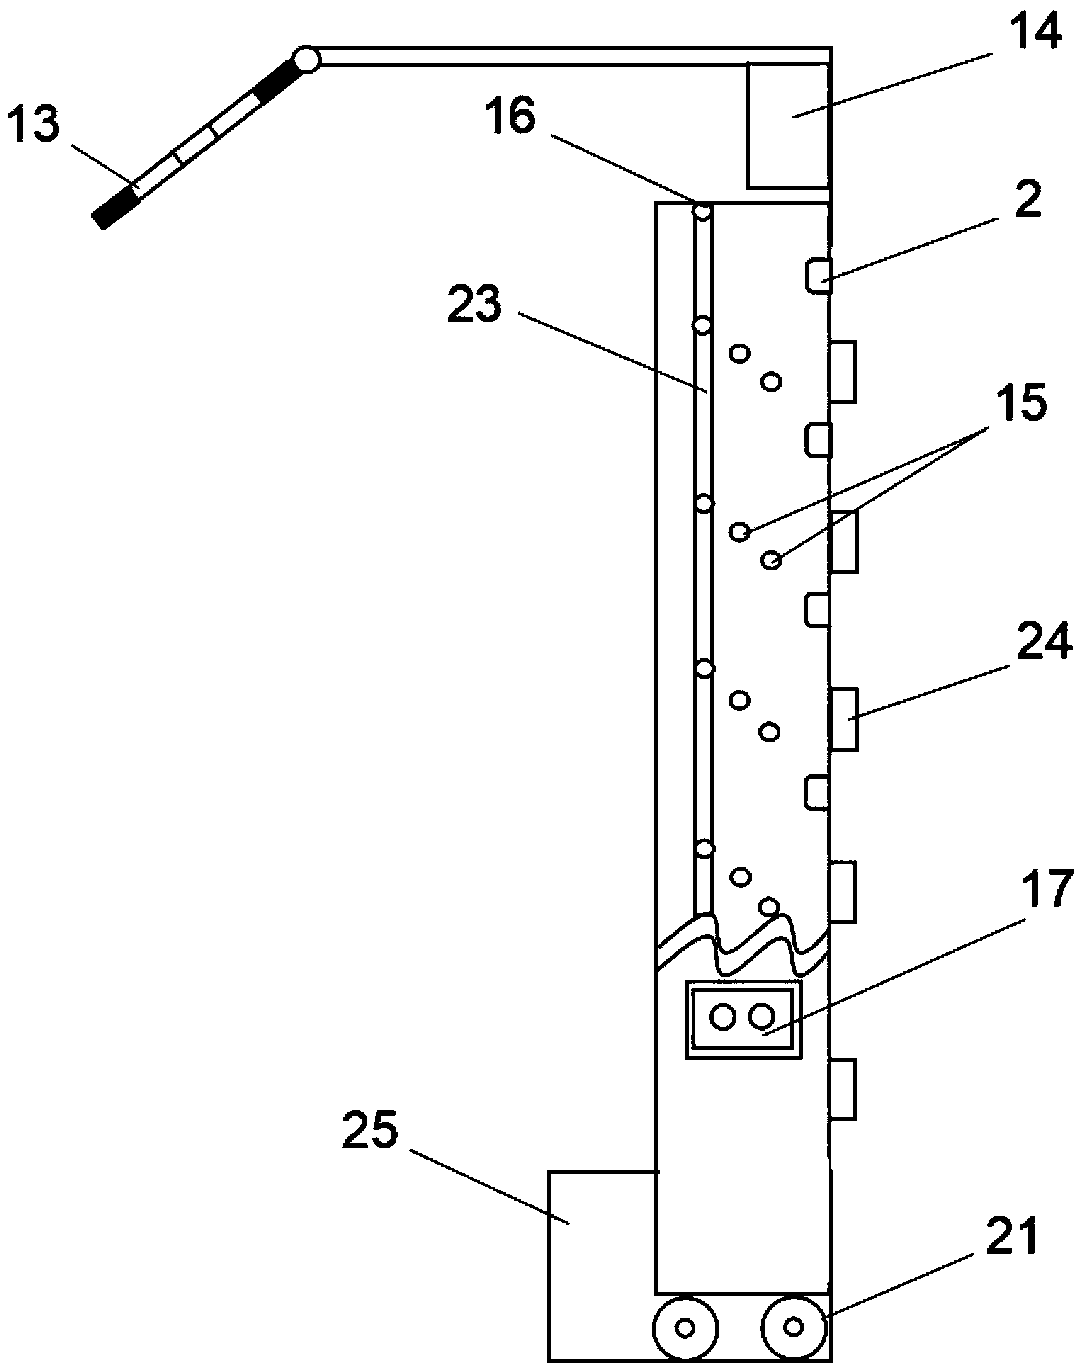 Simple mobile intelligent illumination plant wall device based on internet of things and control method